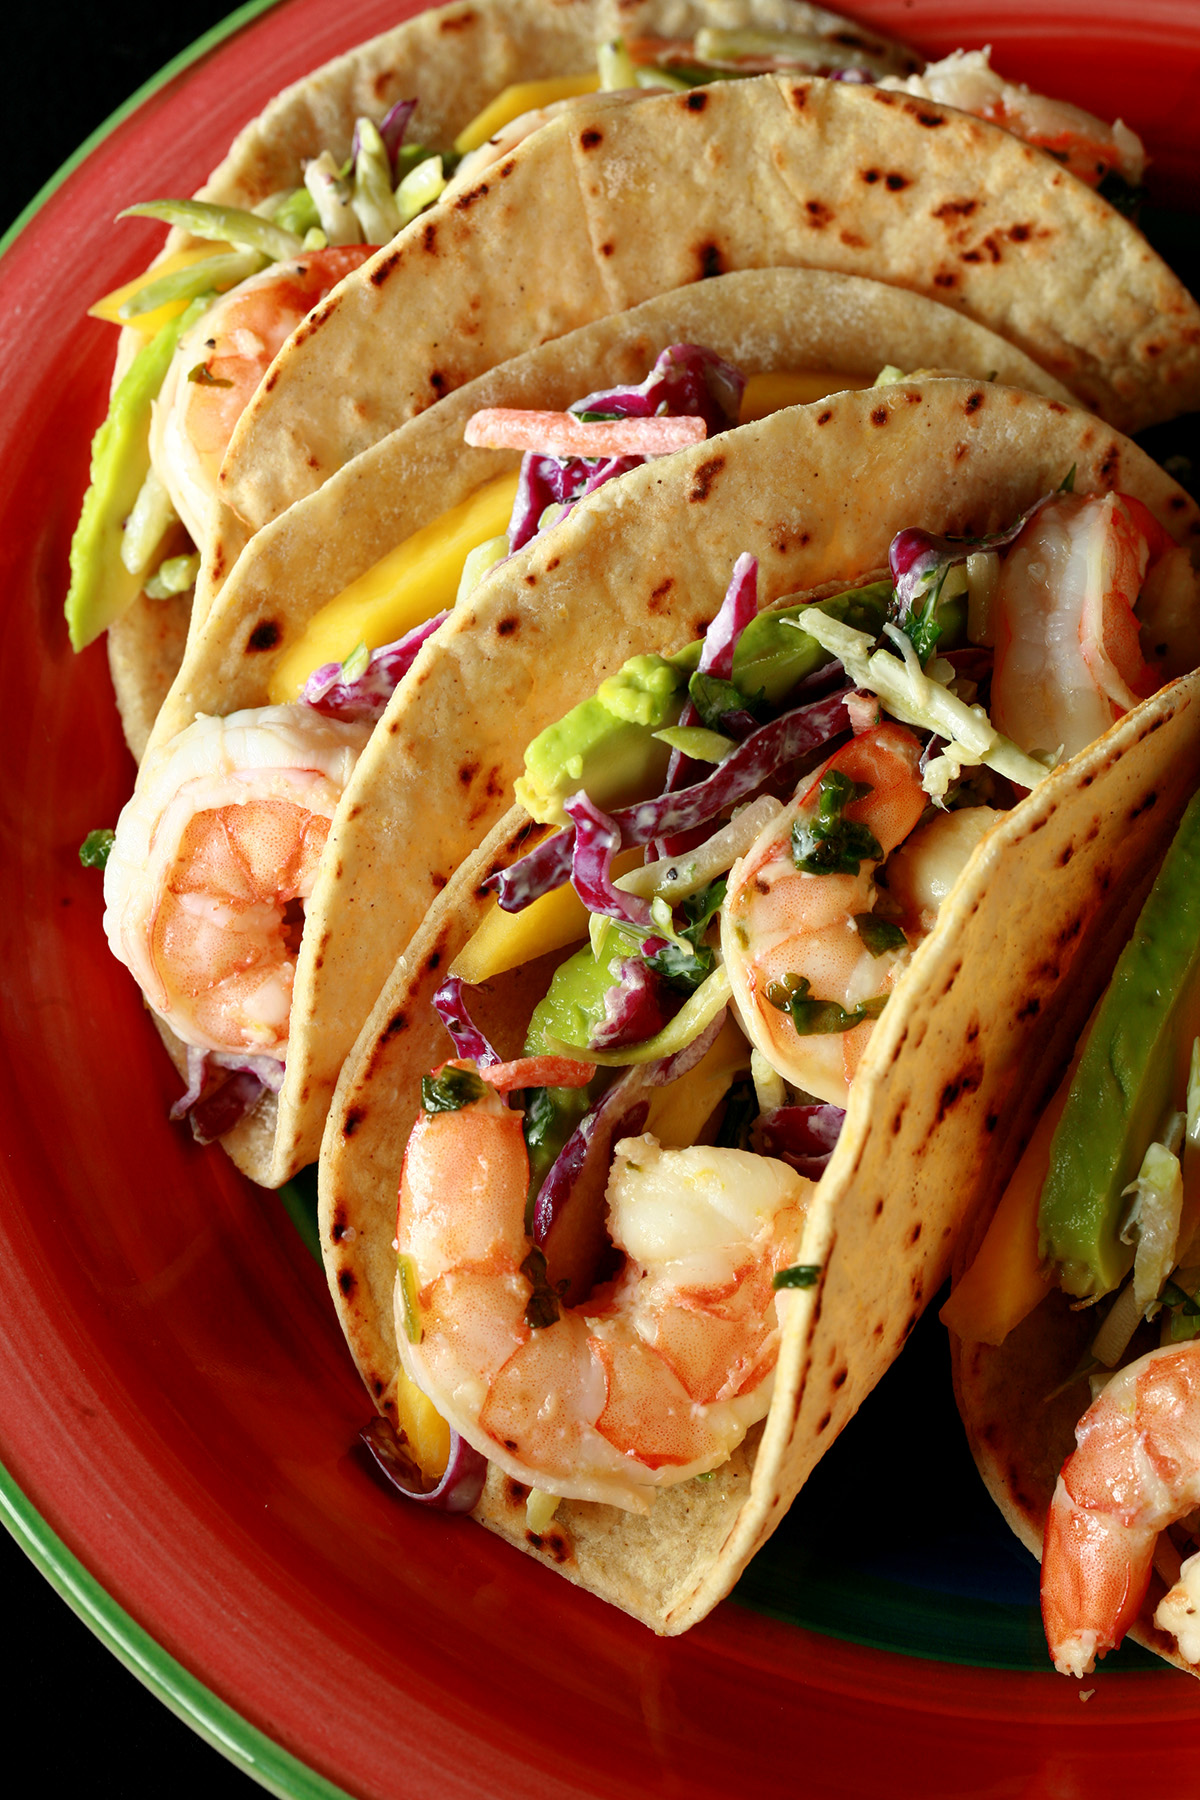 A red plate with shrimp tacos. The tacos are made from gluten-free hybrid tortillas, and look like a more yellow version of flour tortillas.